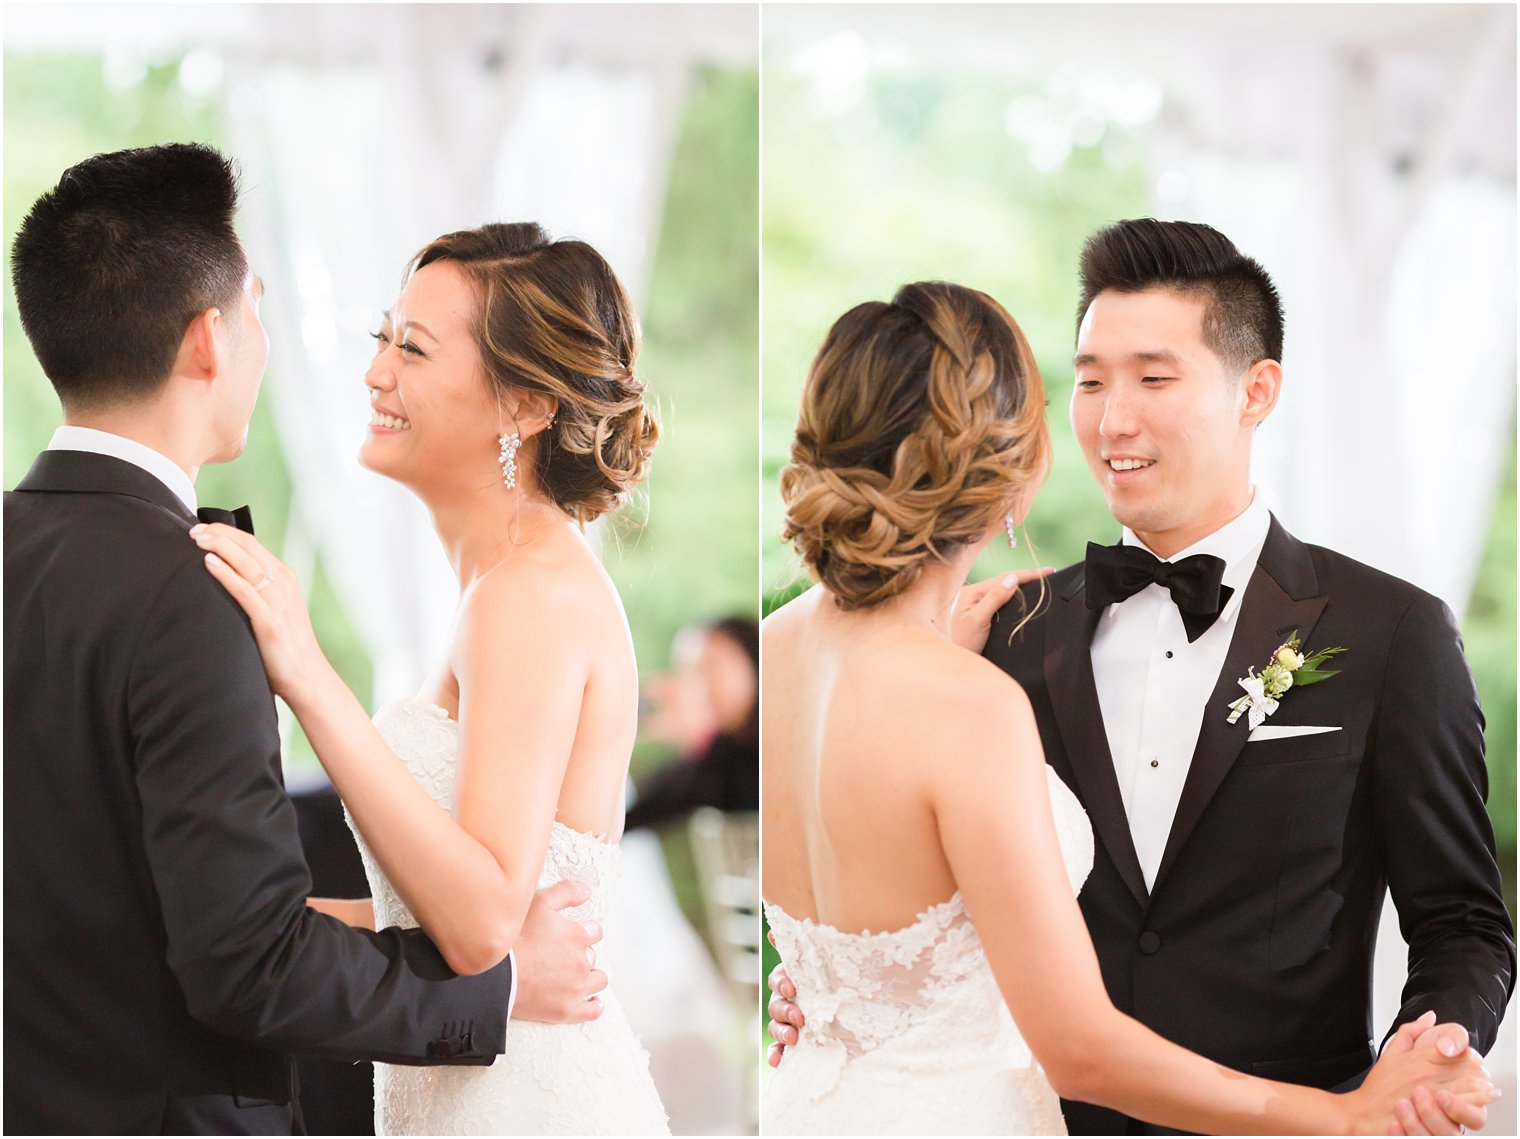 sweet moment during first dance photographed by Idalia Photography